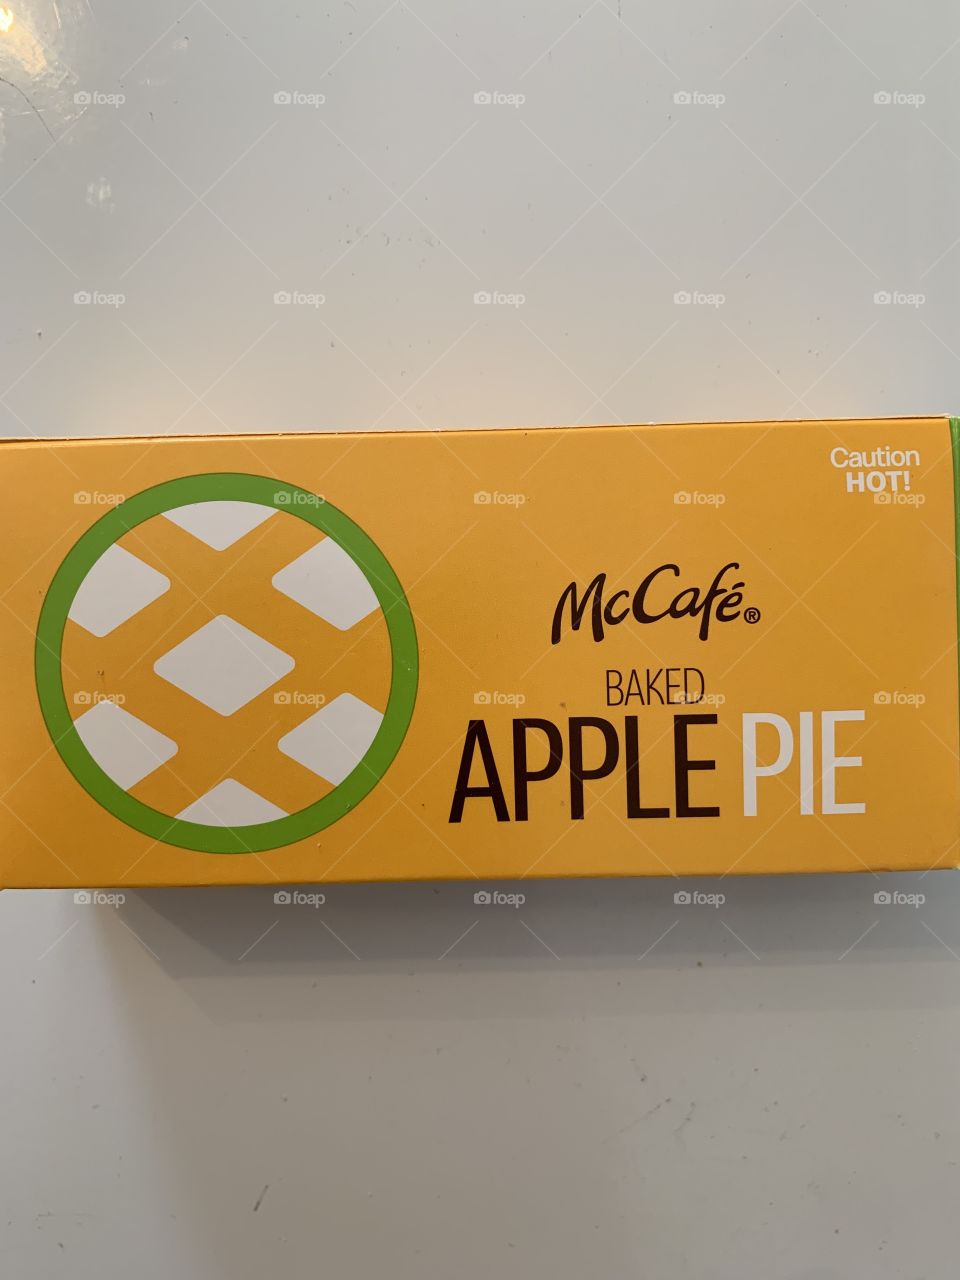 GIVE ME SOME APPLE PIE, THAT’S WHY! 